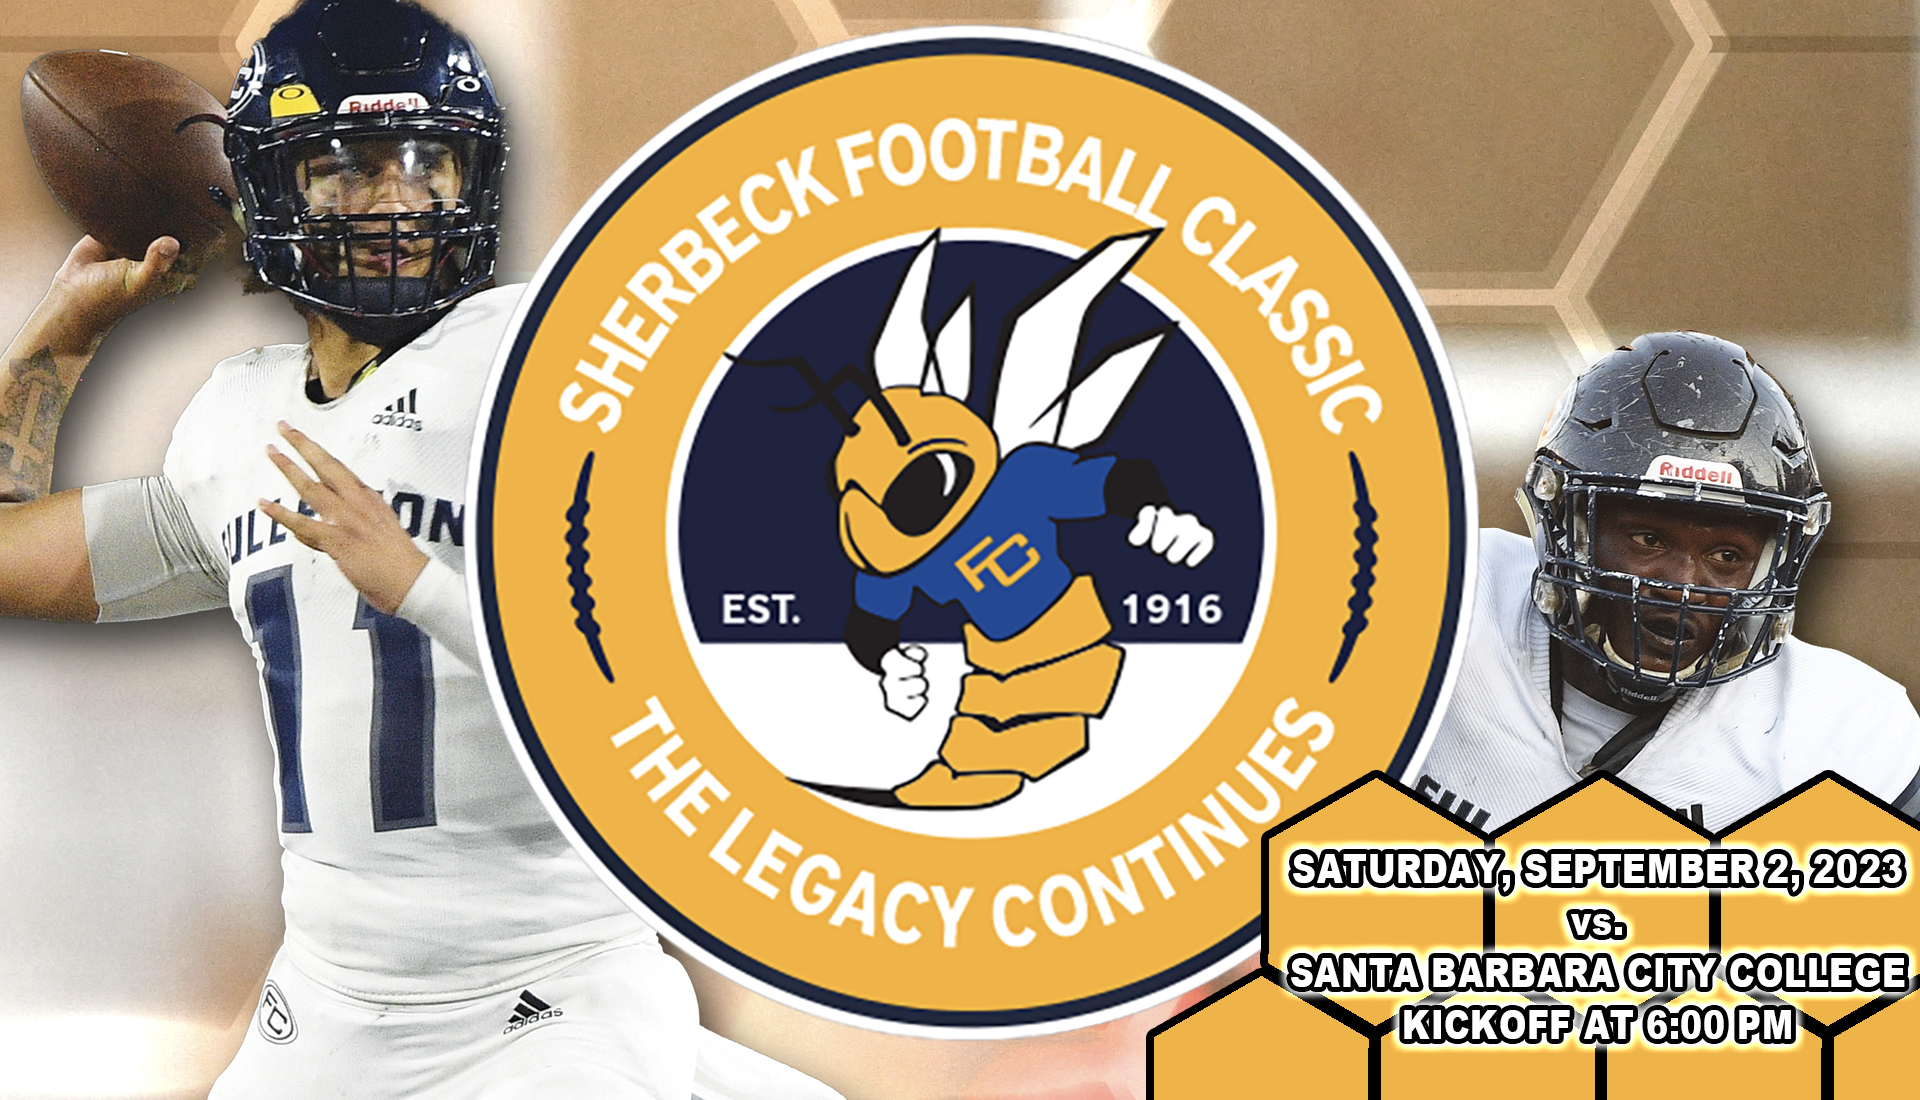 THE SHERBECK FOOTBALL CLASSIC